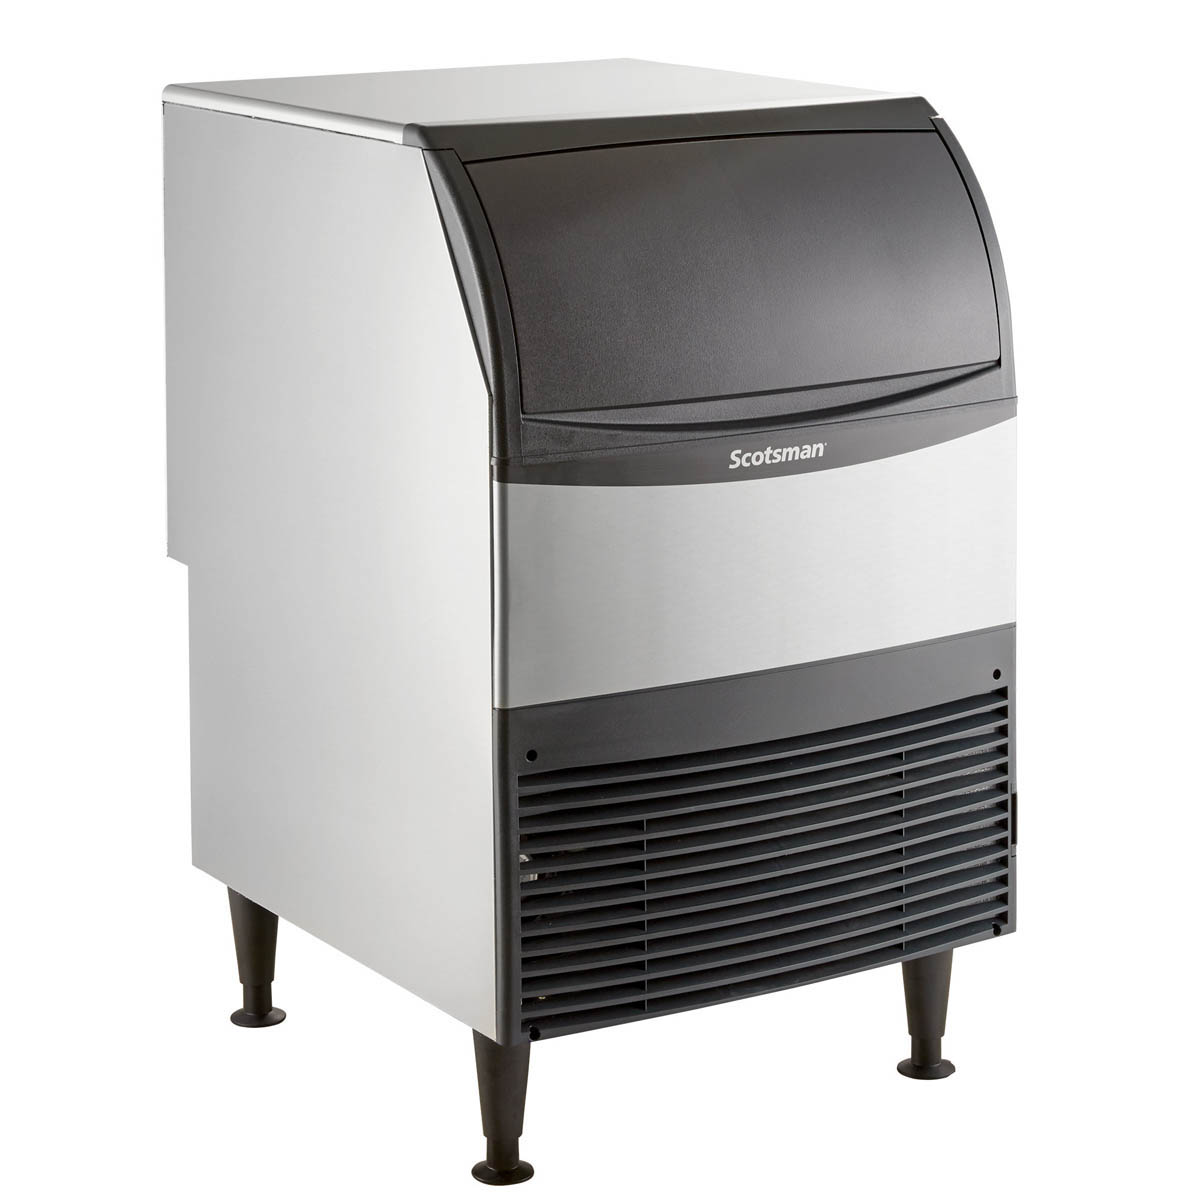 Scotsman UF424A-1 Provides Soft and Slow Melting For Your Service and Displays, Chef's Deal